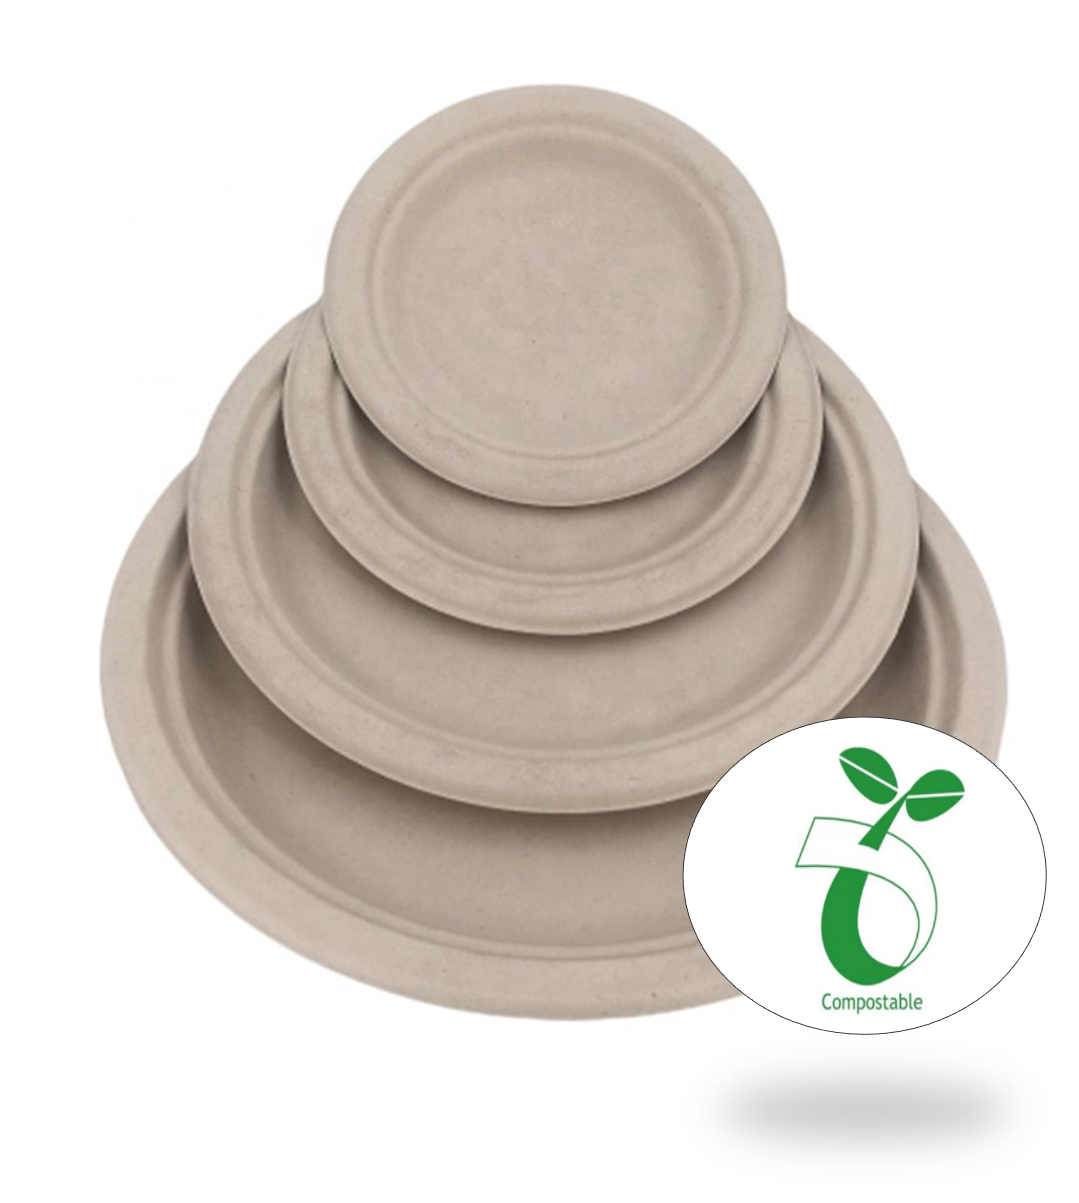 Reduce landfill with these premium biodegradable 6-inch Round Bagasse Molded Plates constructed with sugarcane fibers.